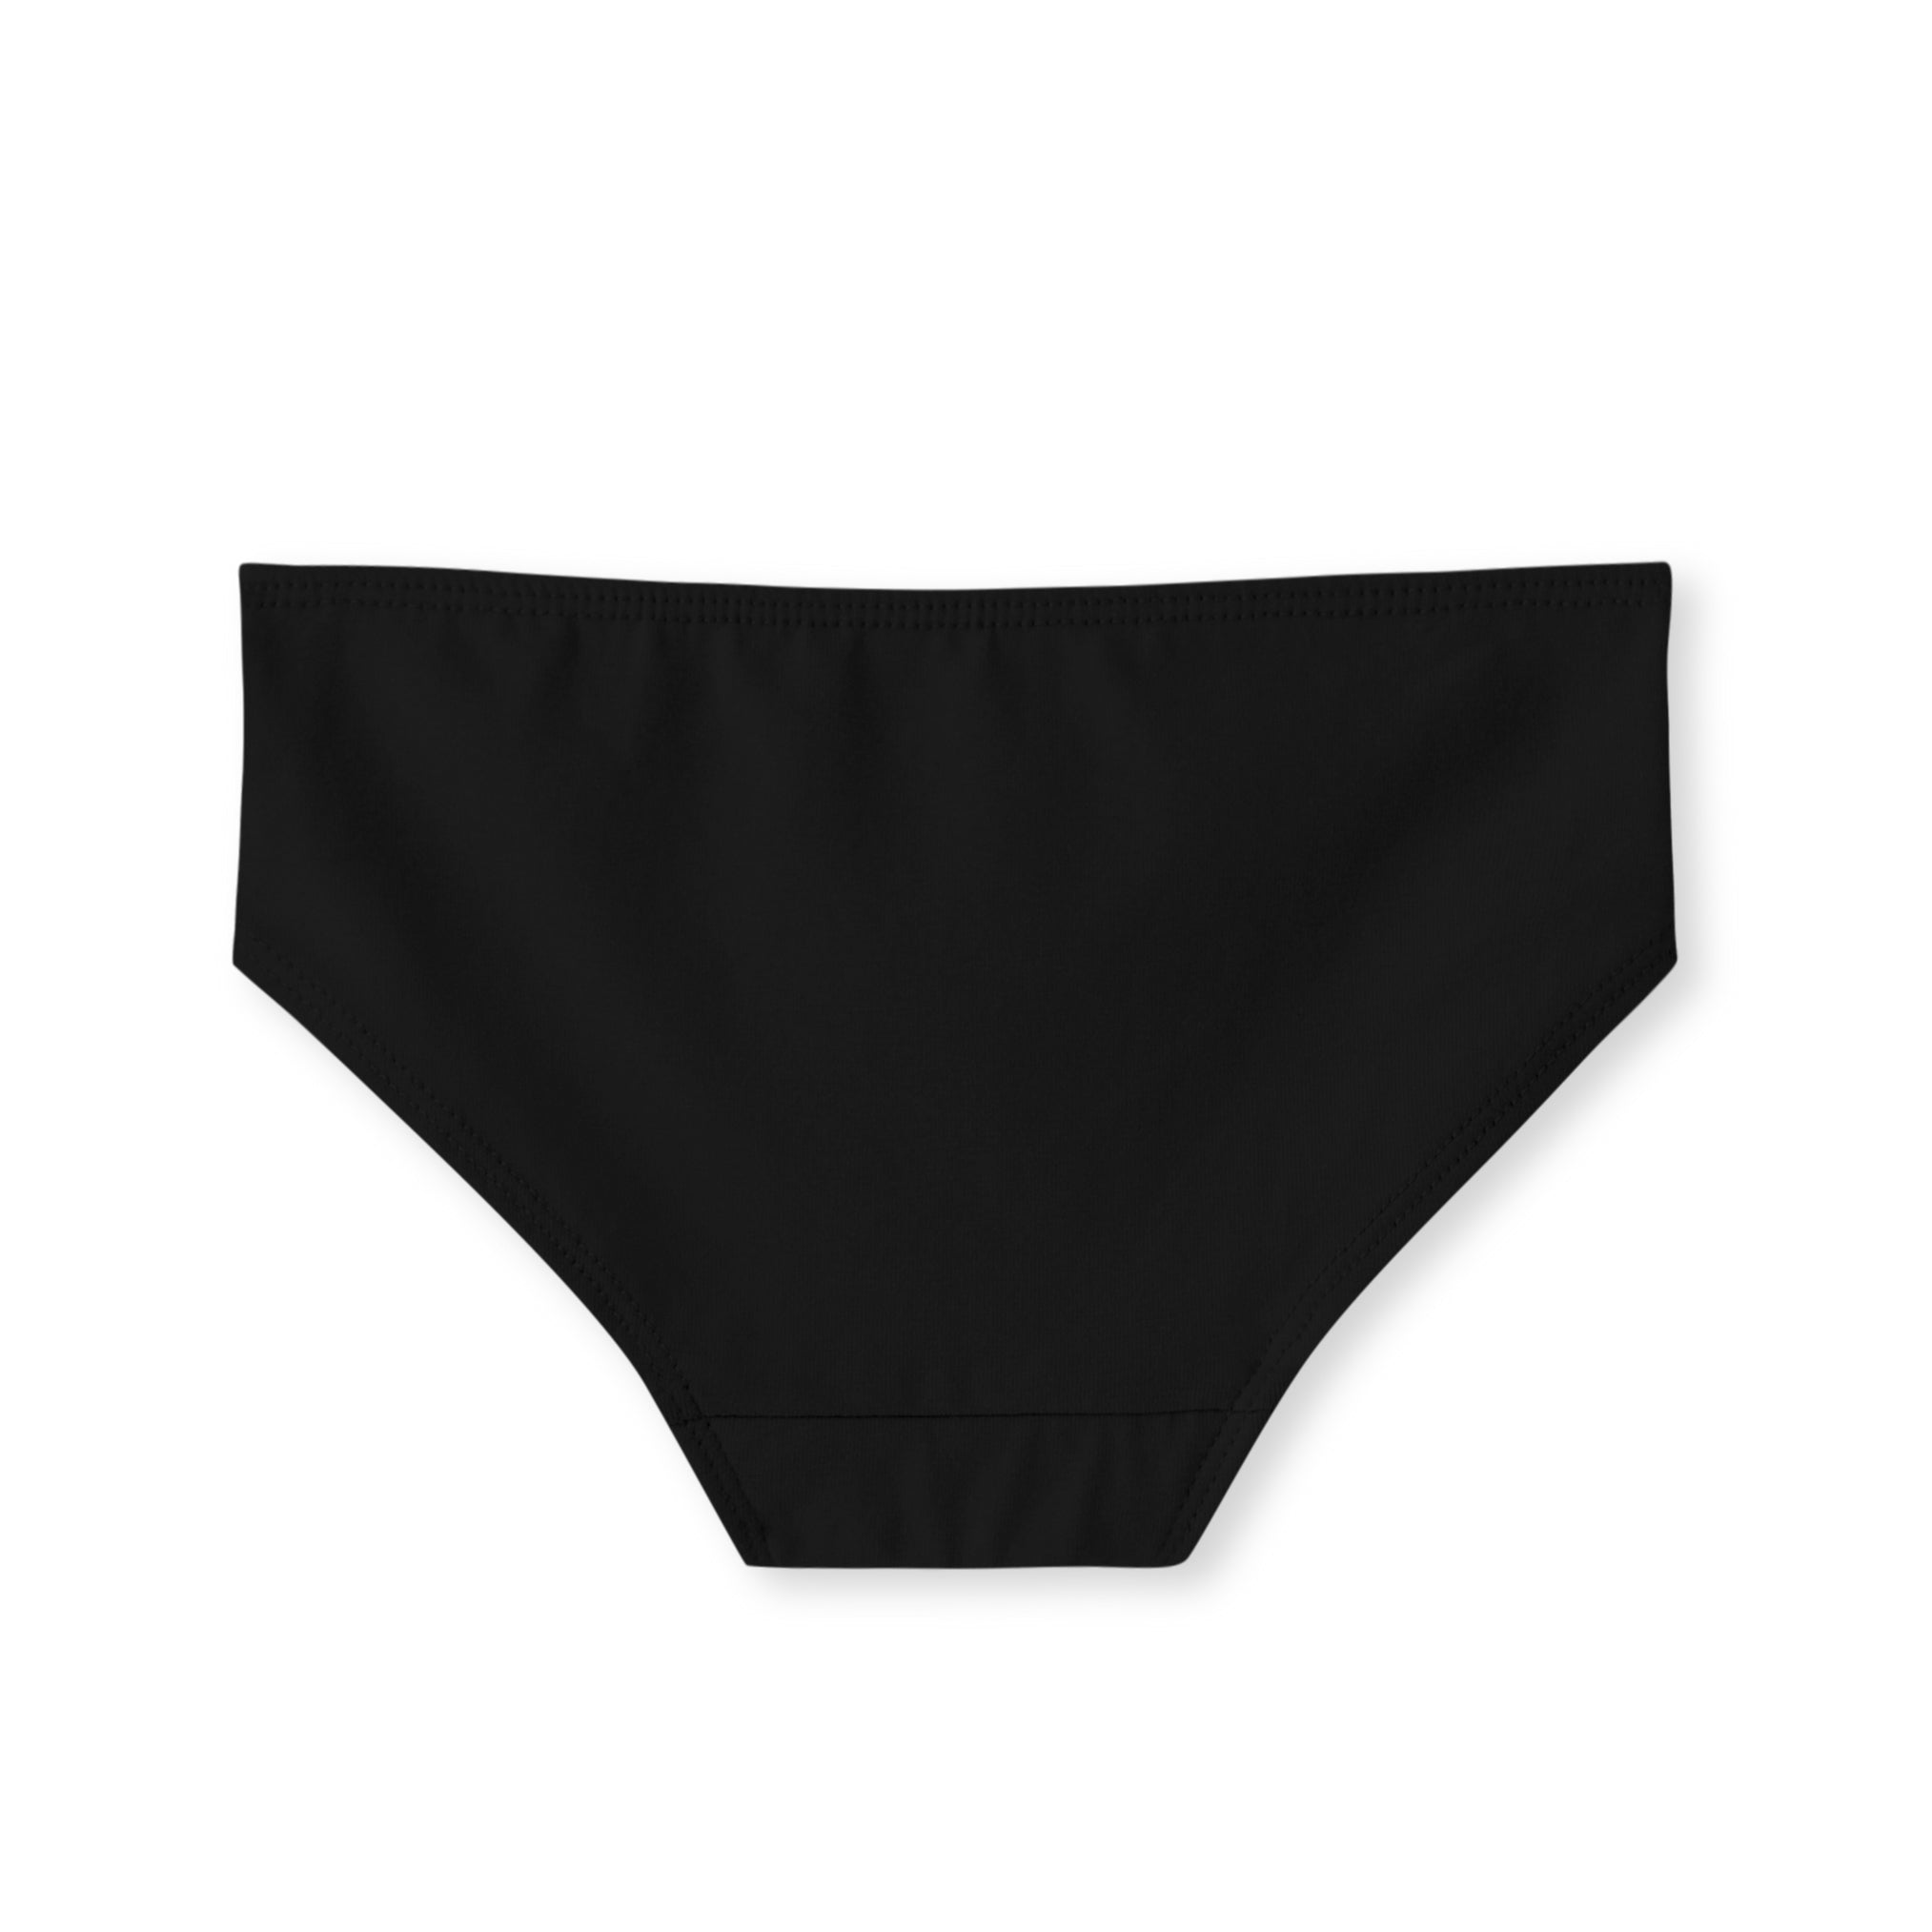 Tucking Panties: Stylish, Comfortable Underwear for a Flawless